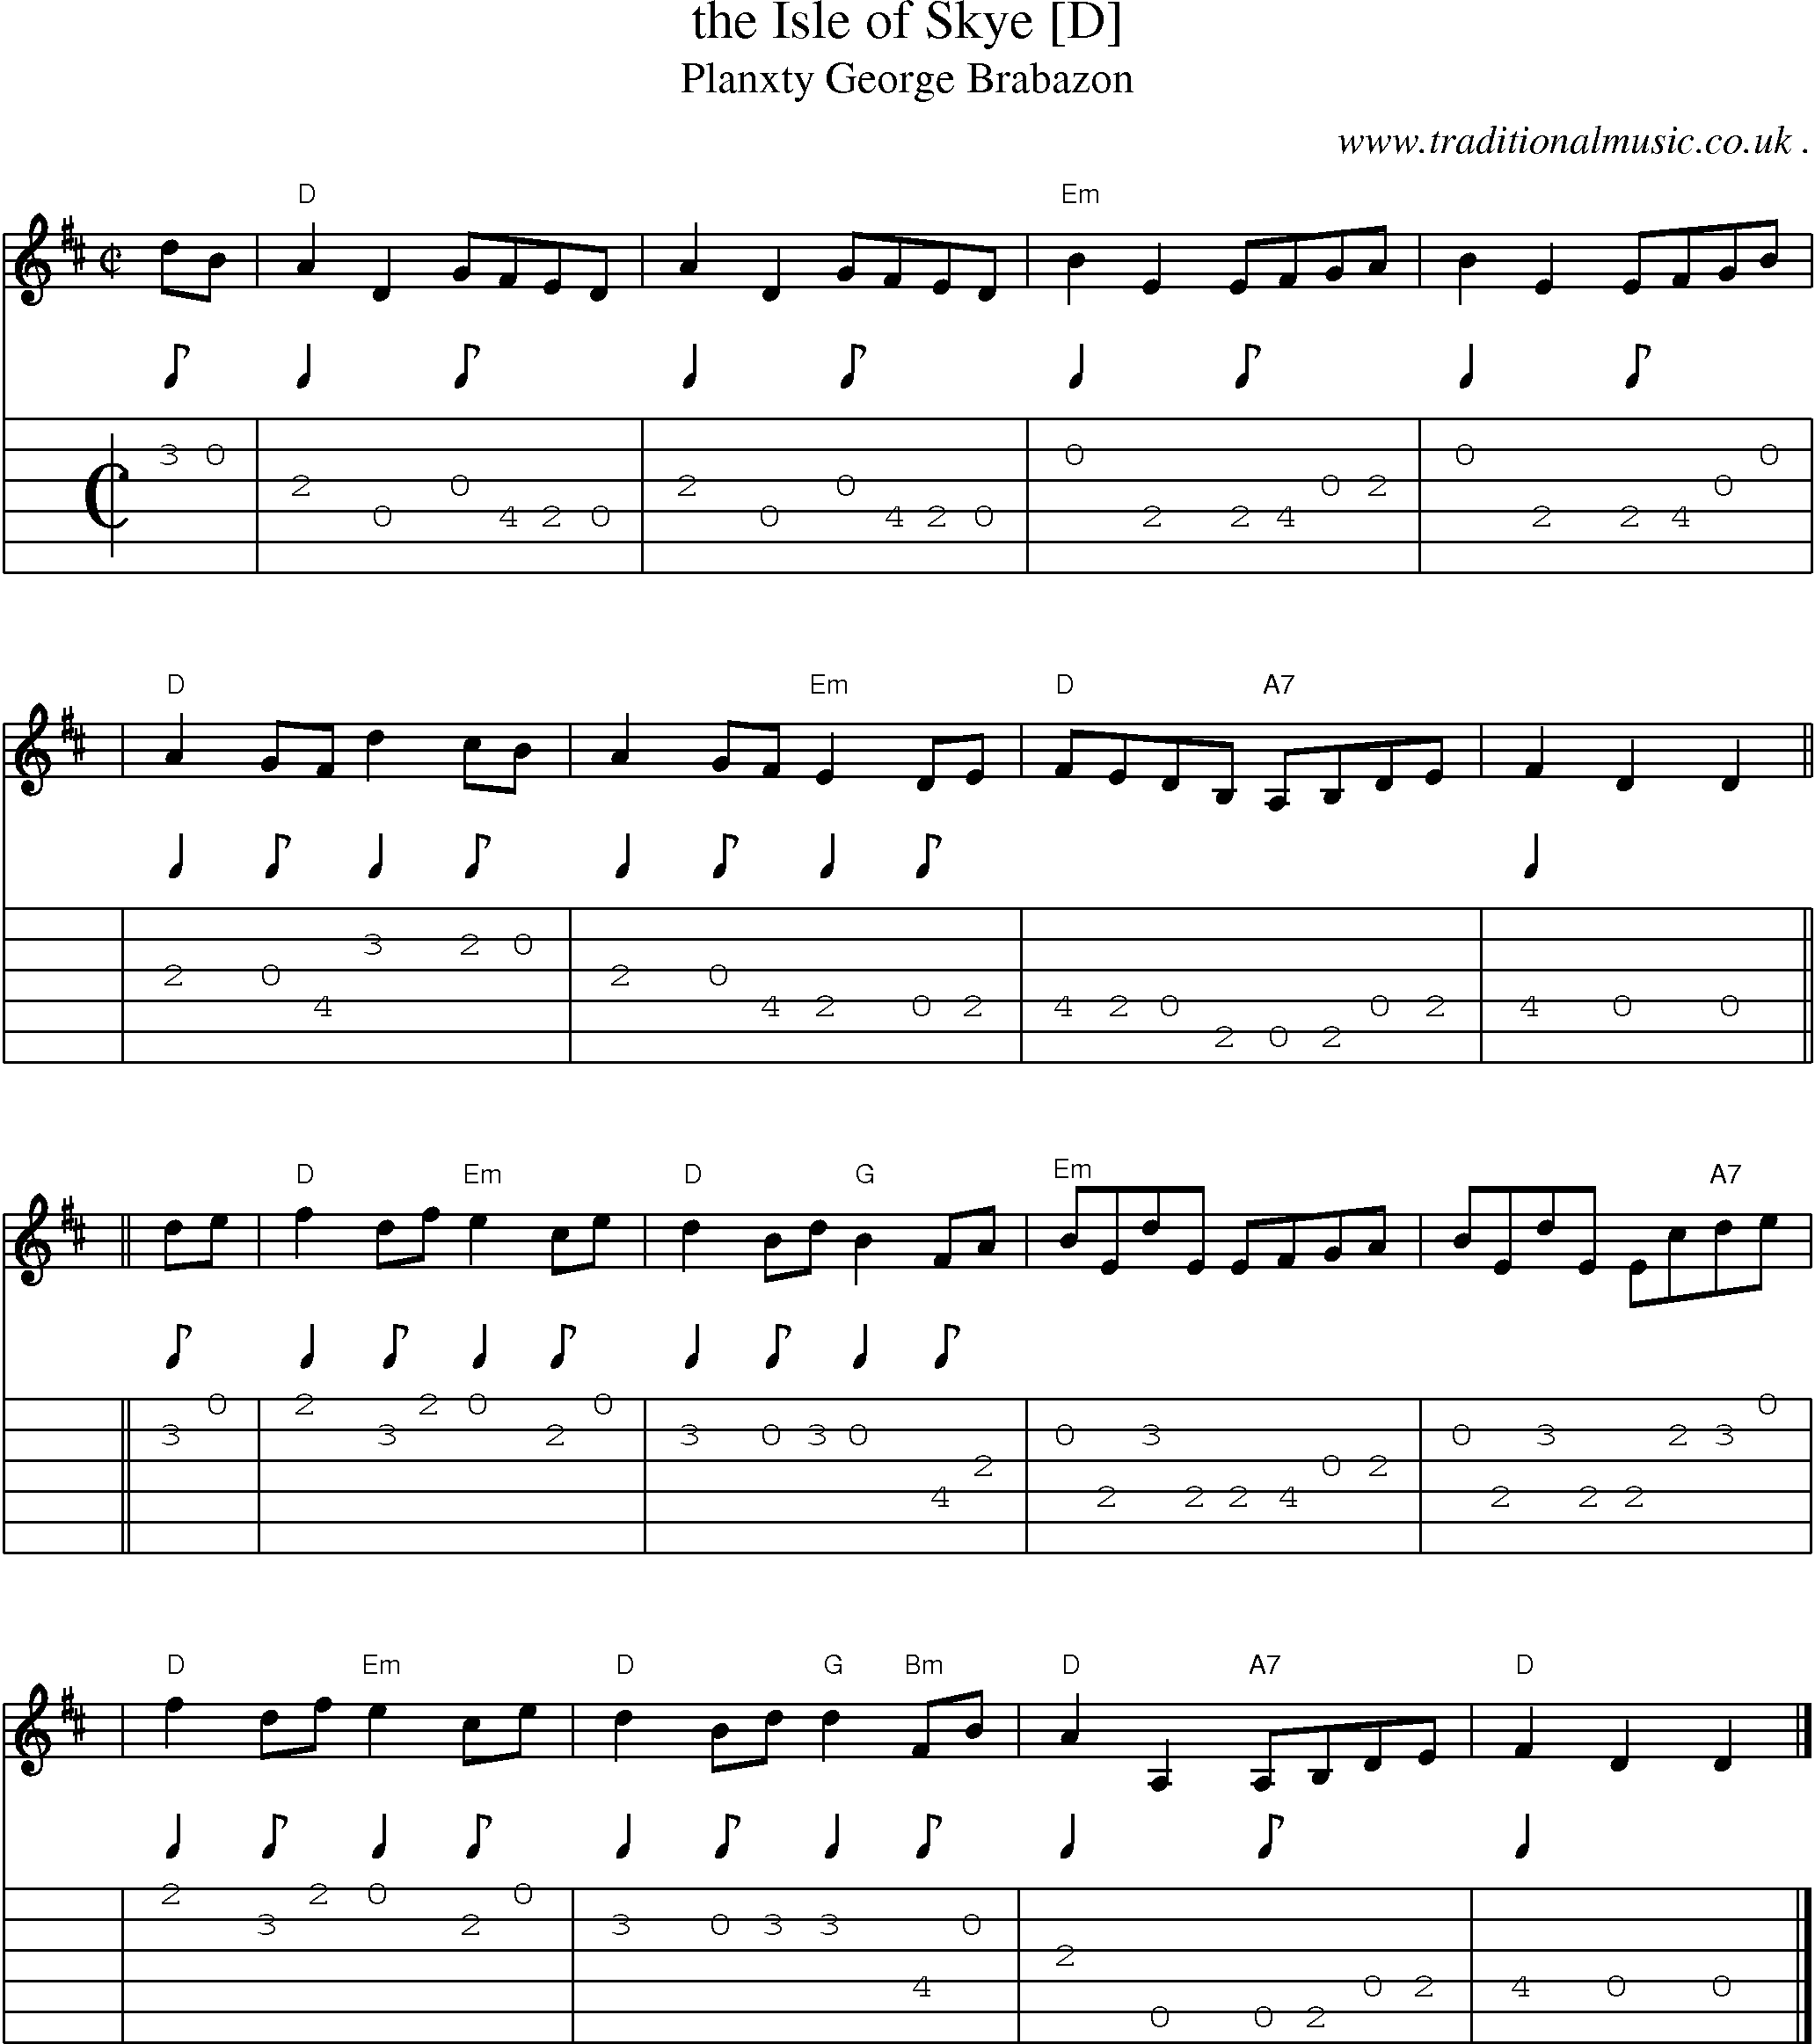 Sheet-music  score, Chords and Guitar Tabs for The Isle Of Skye [d]